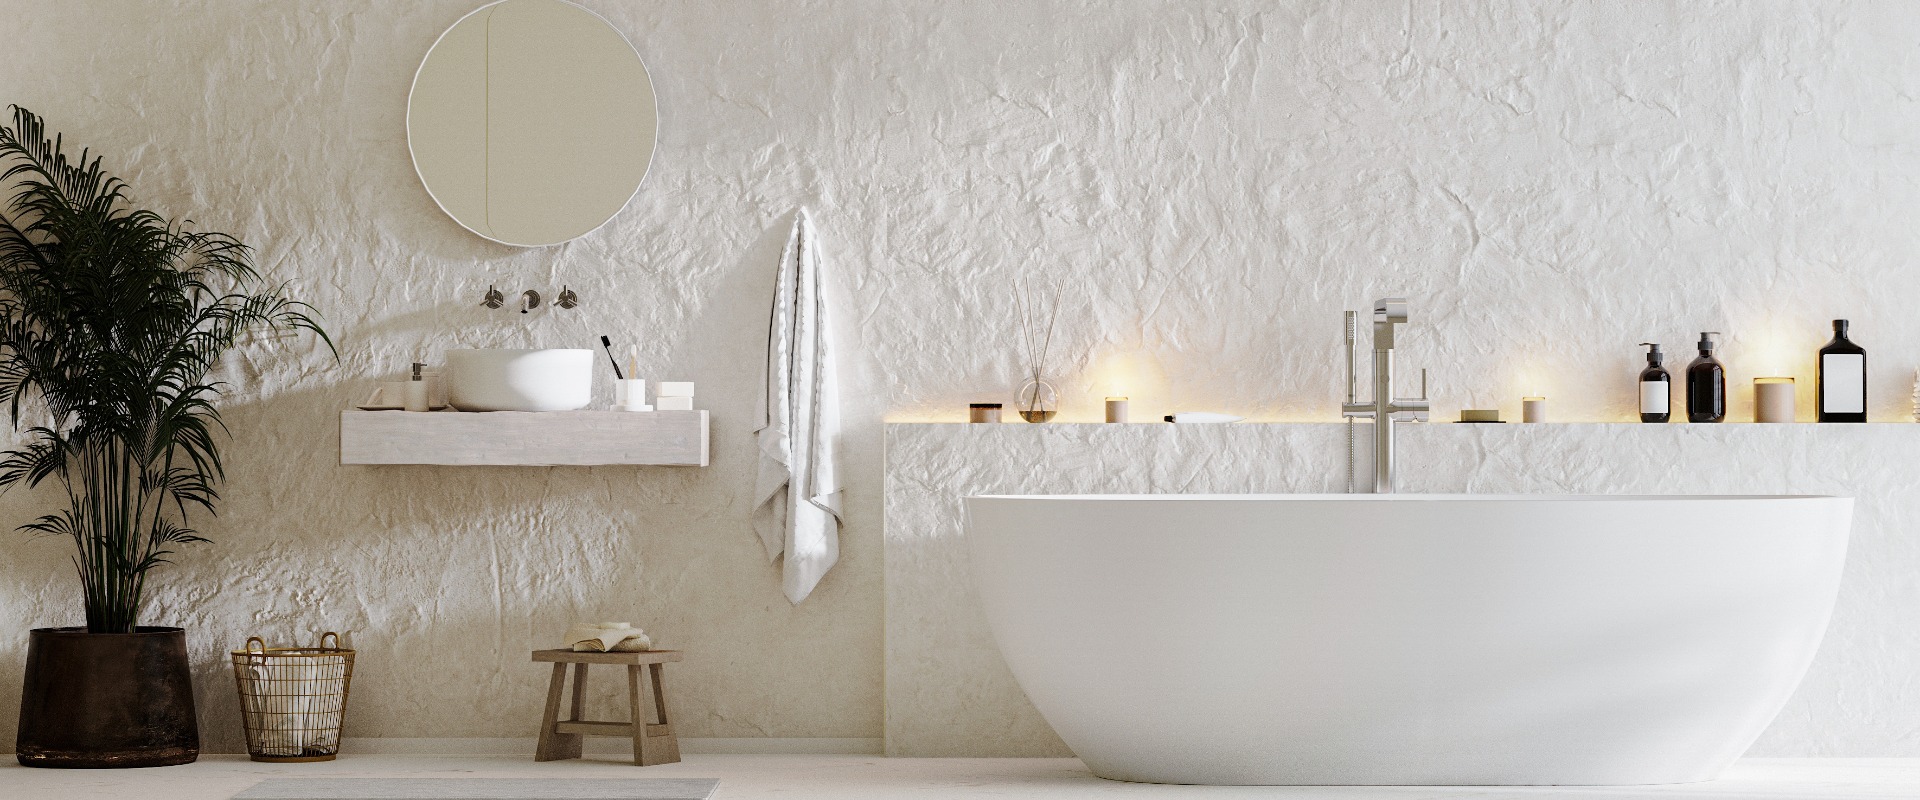 Modern bathroom interior mock up with bathtub, sink and mirror, towels and bath accessories, 3d rendering